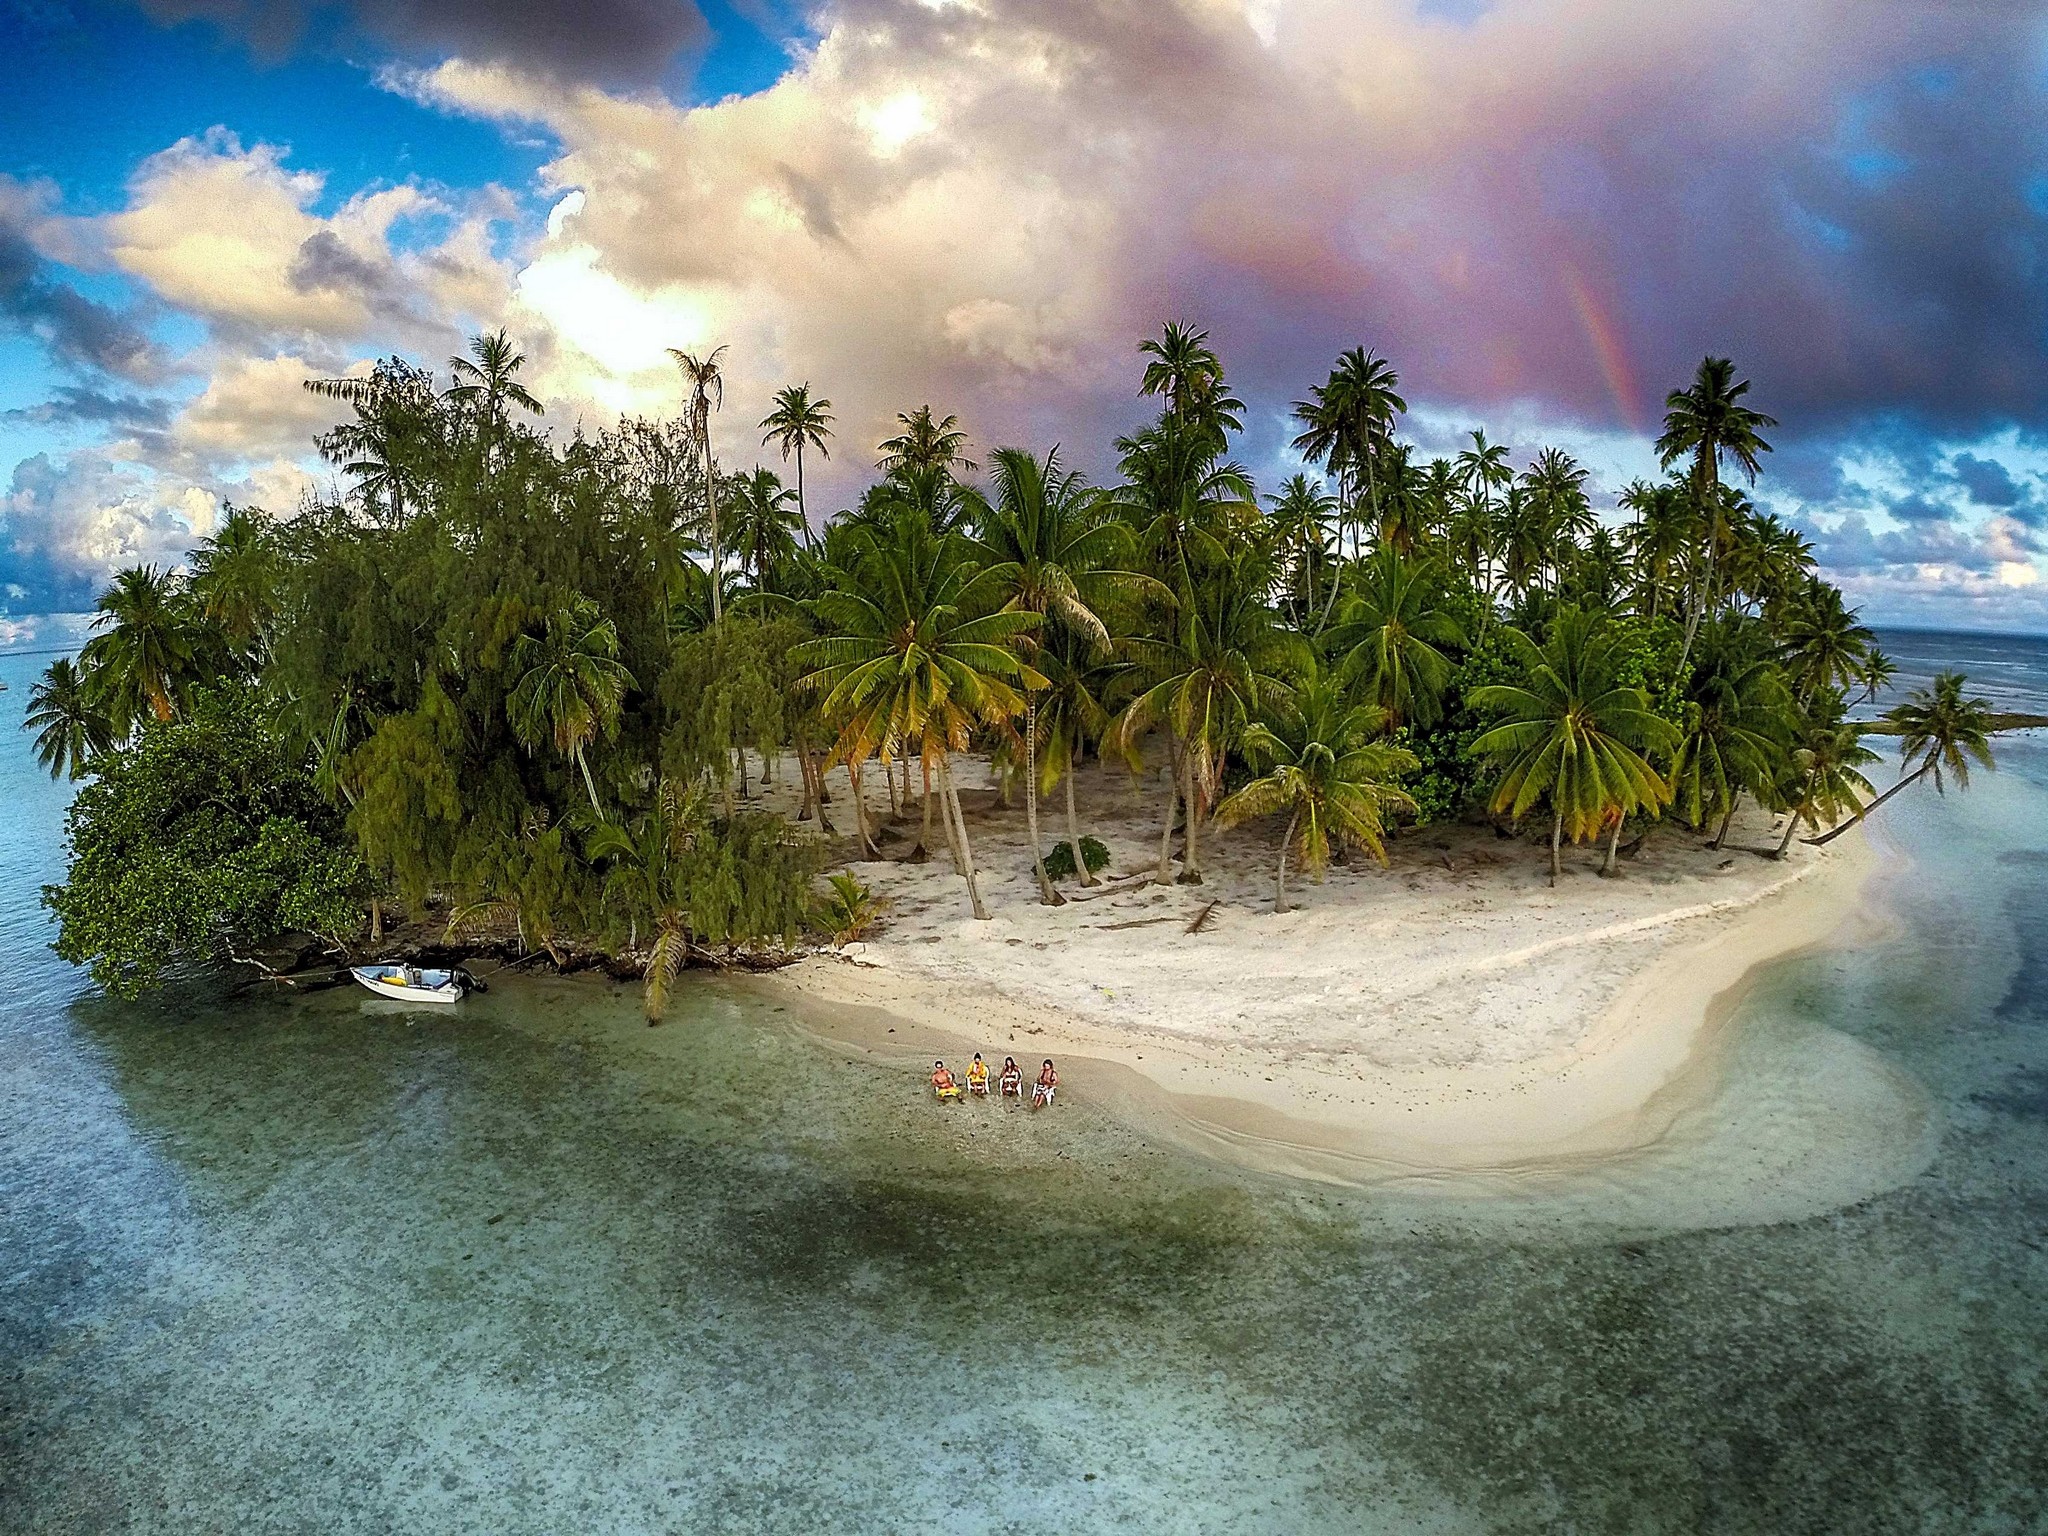 General 2048x1536 nature photography landscape island rainbows palm trees beach sand tropical boat sea clouds summer French Polynesia